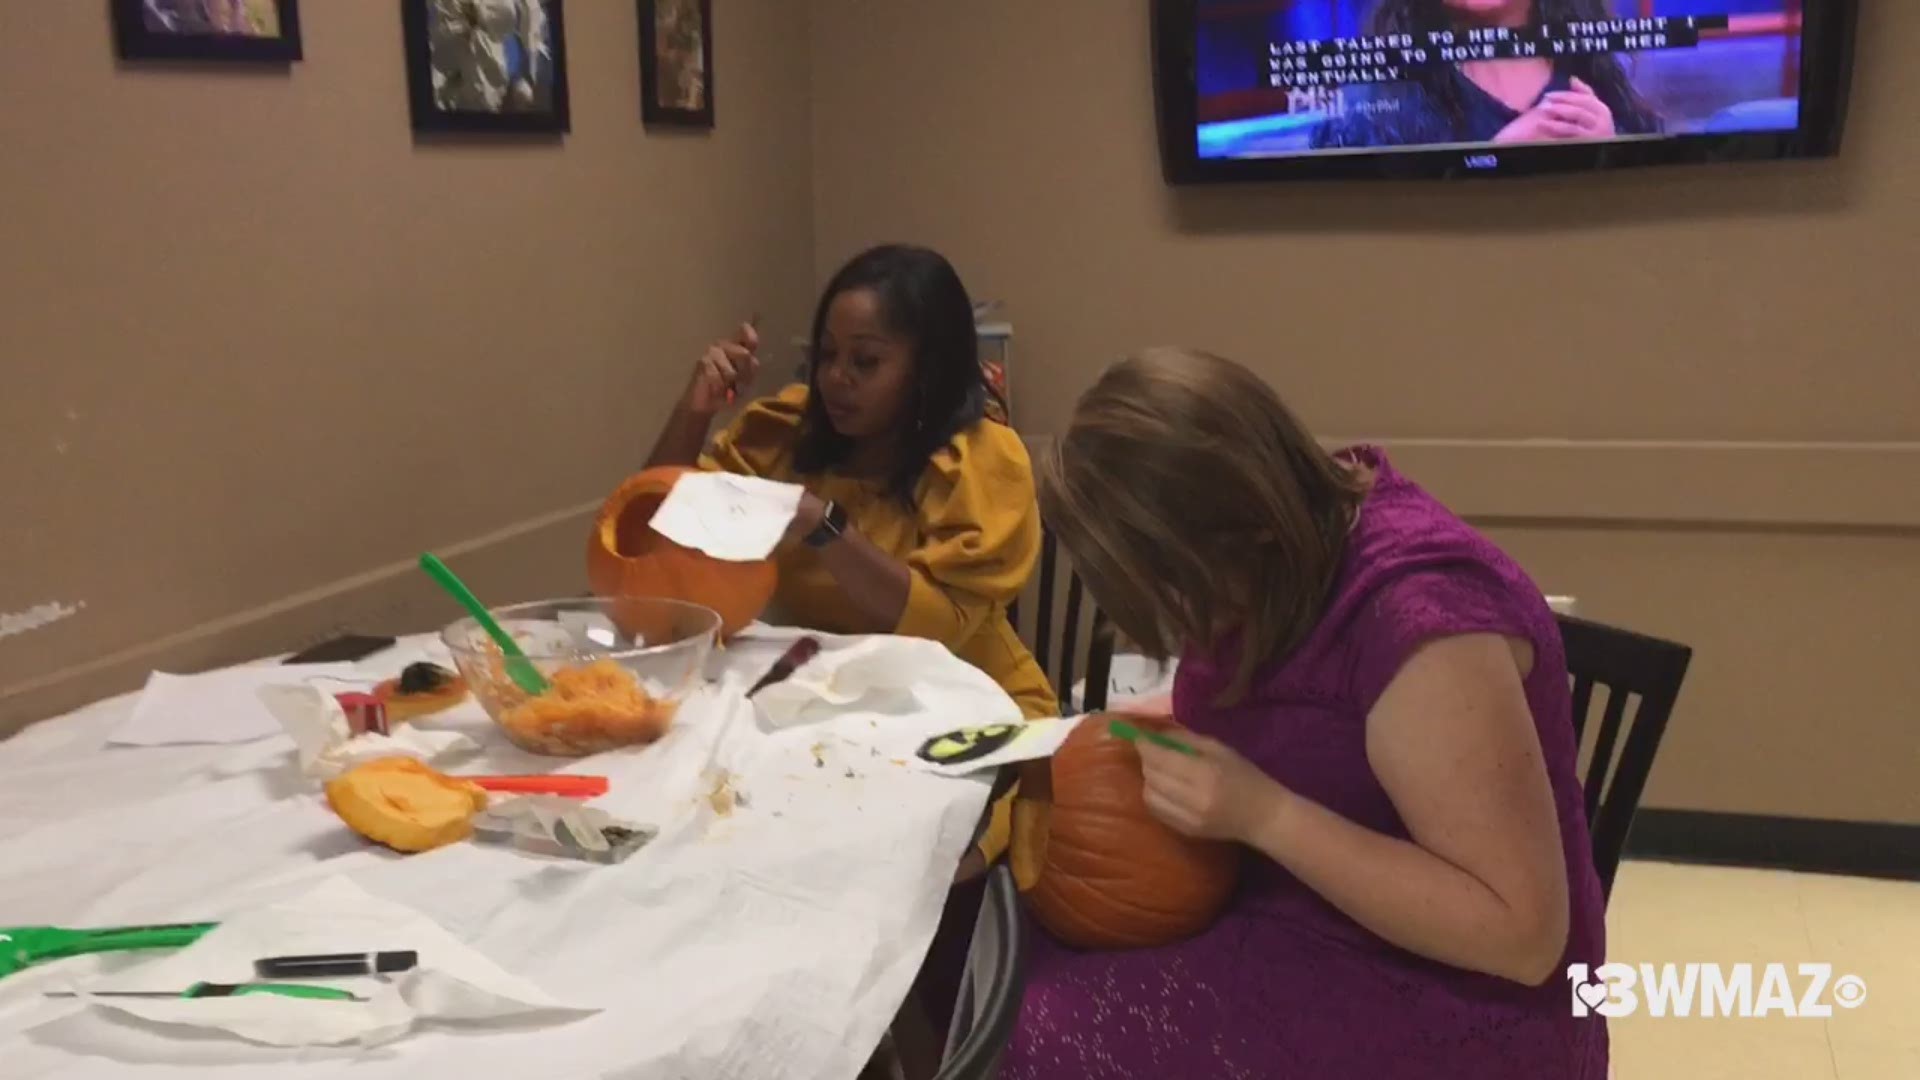 Katelyn, Eryn, and Hunter are carving pumpkins, and you'll get to vote for your favorite! We'll announce who has the most votes Thursday morning at 6 a.m.